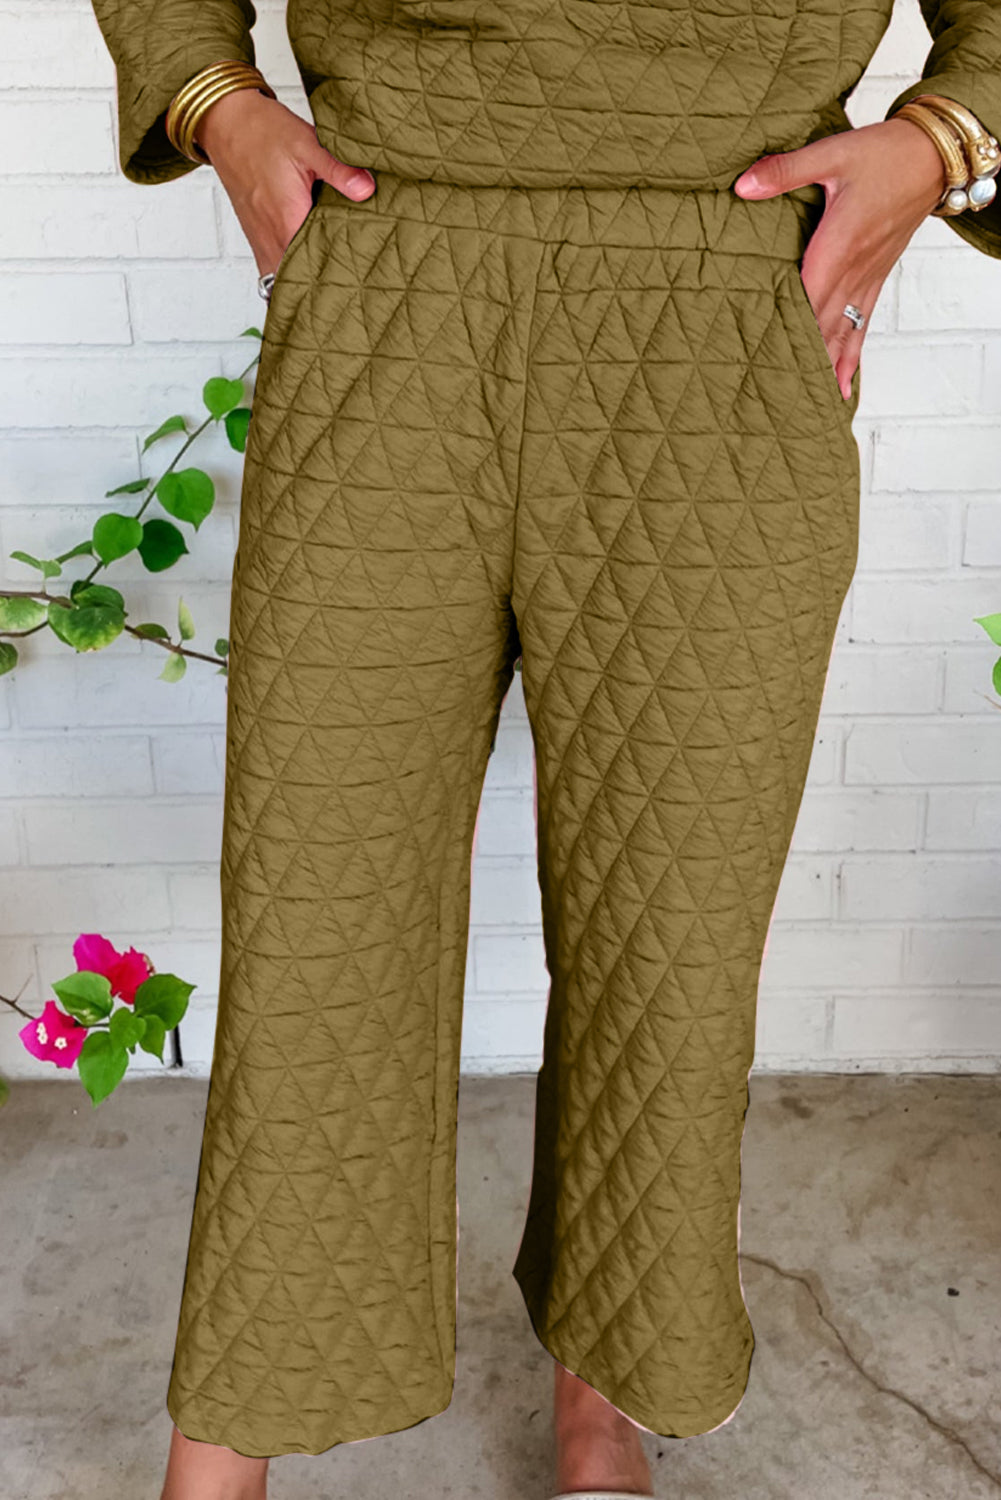 Solid Quilted Pullover and Pants Outfit-Variety of Colors Material: Material: 95% Polyester+5% Elastane  It includes a quilted pullover top and matching pants. It’s soft and comfy for all day wearing.